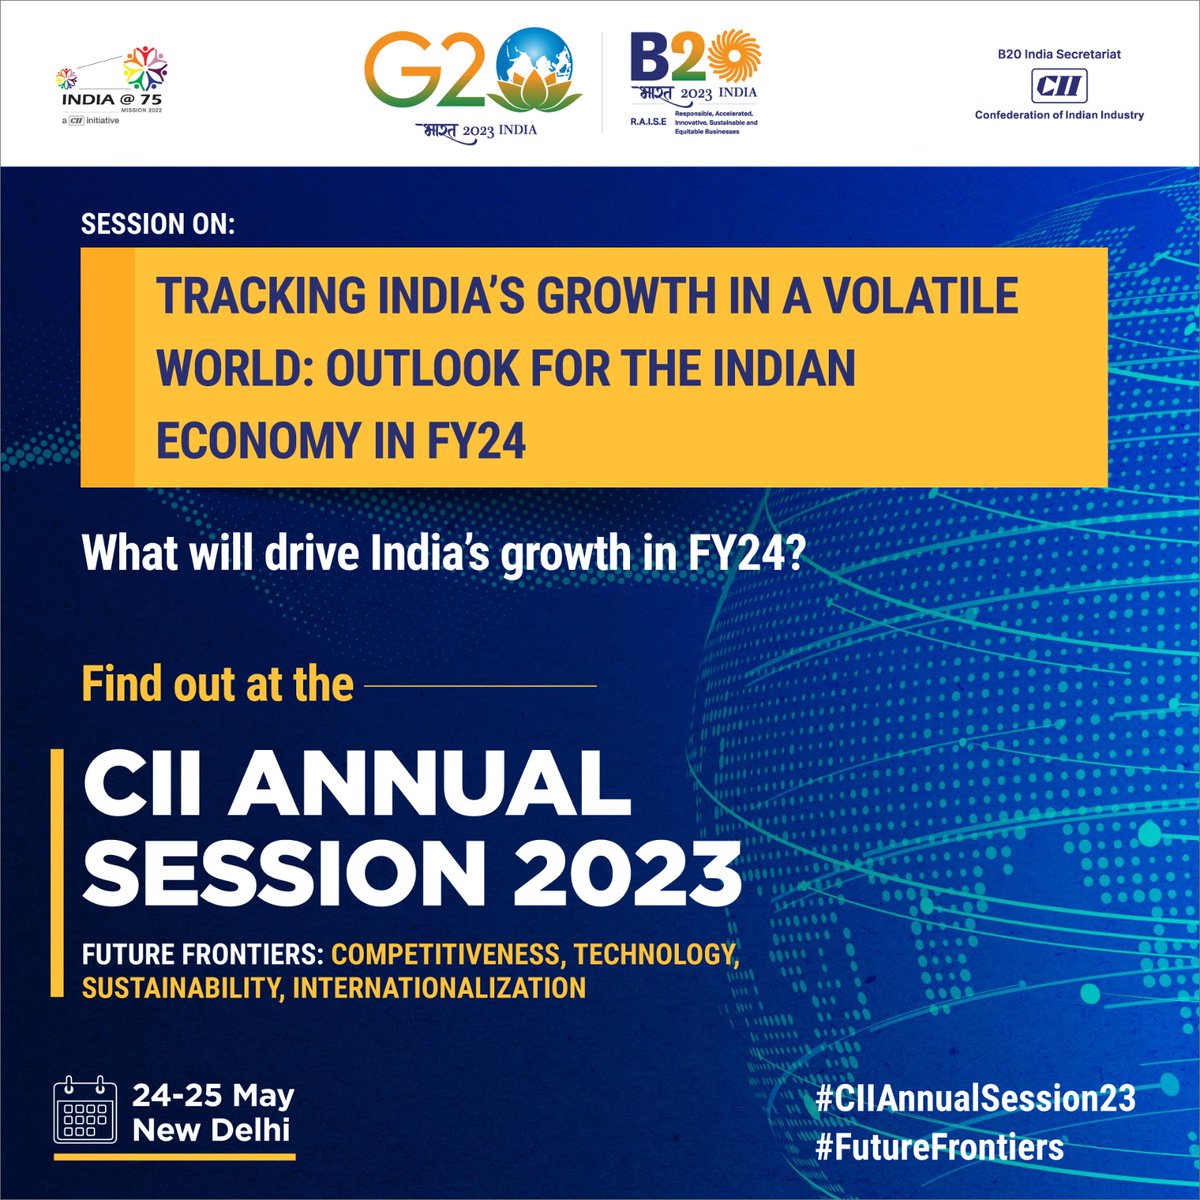 #StayTuned as decision makers & thought leaders deliberate on ‘Tracking India’s growth in a volatile world: Outlook for the Indian economy in FY24' at the #CIIAnnualSession23.
Visit➡ ciiannualsession.in/index.html 
#FutureFrontiers #technology #sustainability #development